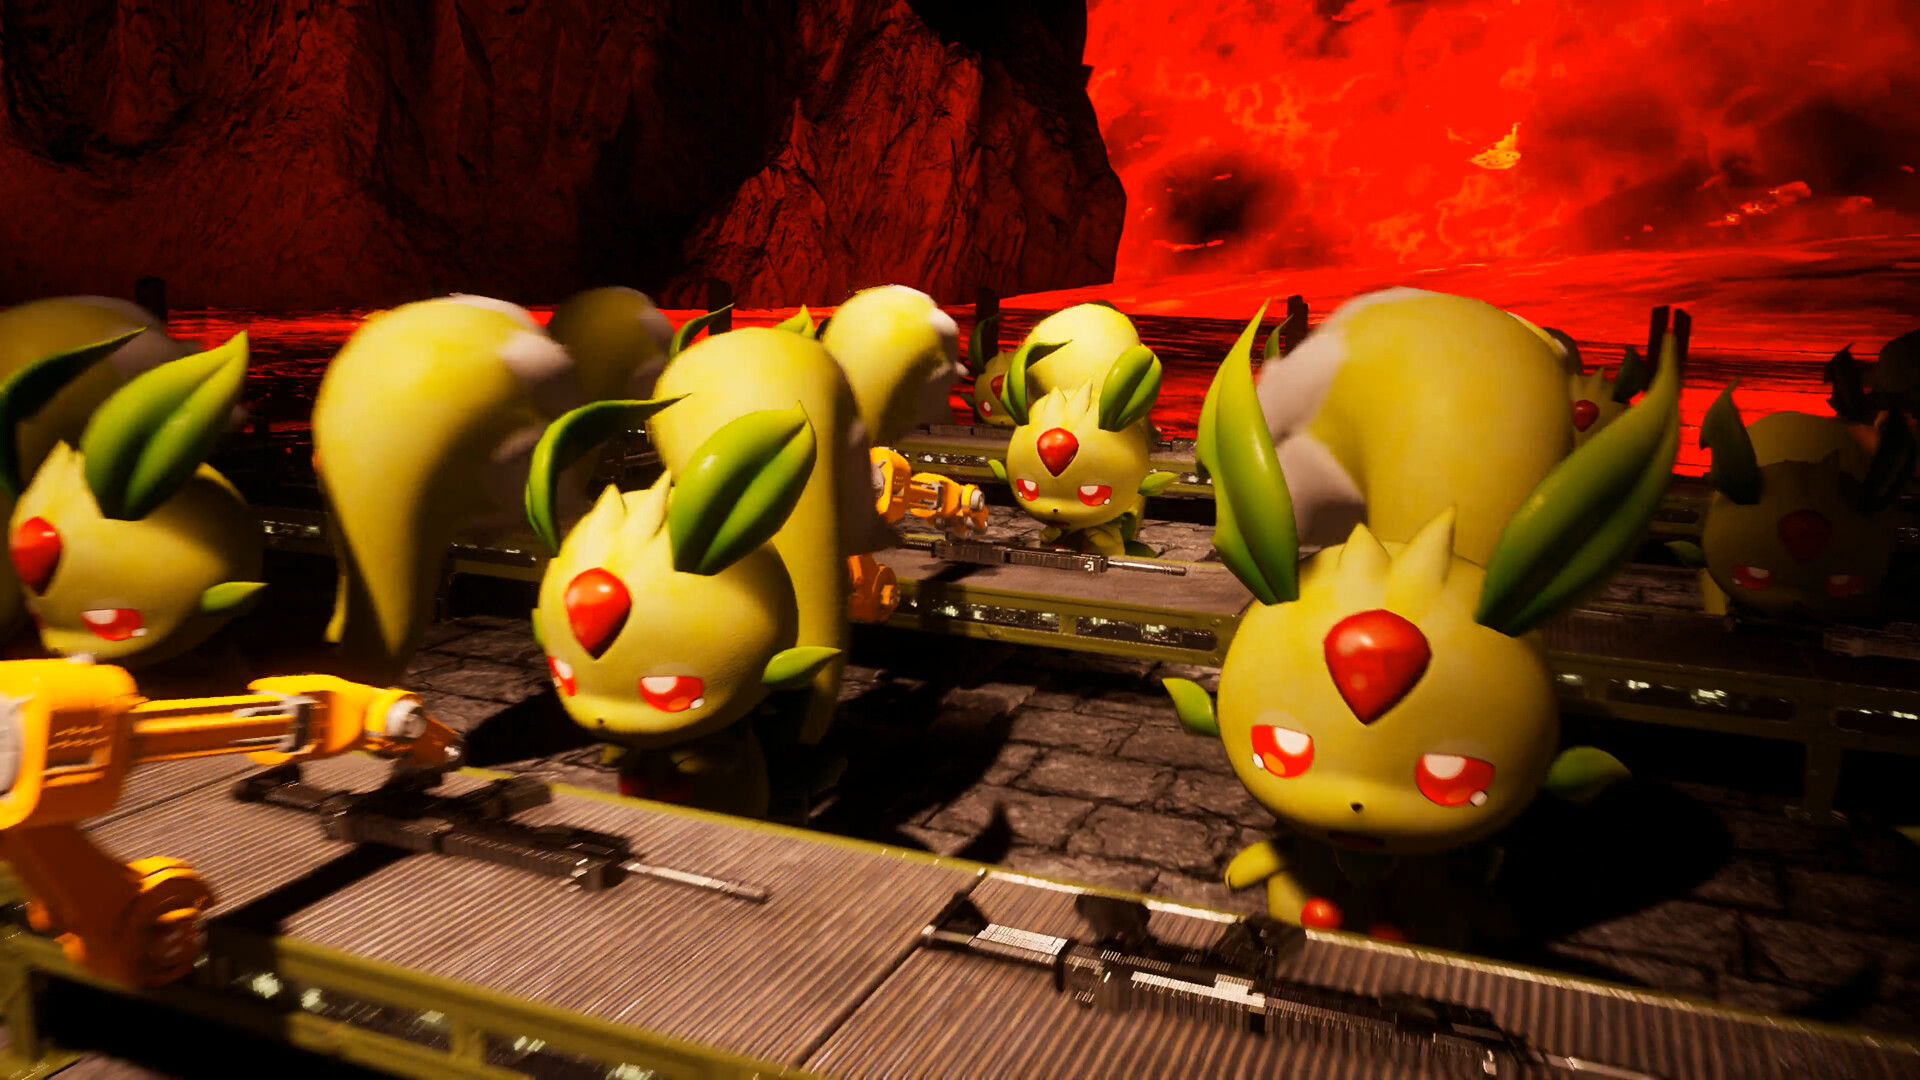 Palworld player insta-kills a mini-boss with a +130% attack power chipmunk that ate 116 siblings to get stronger – Gamesradar